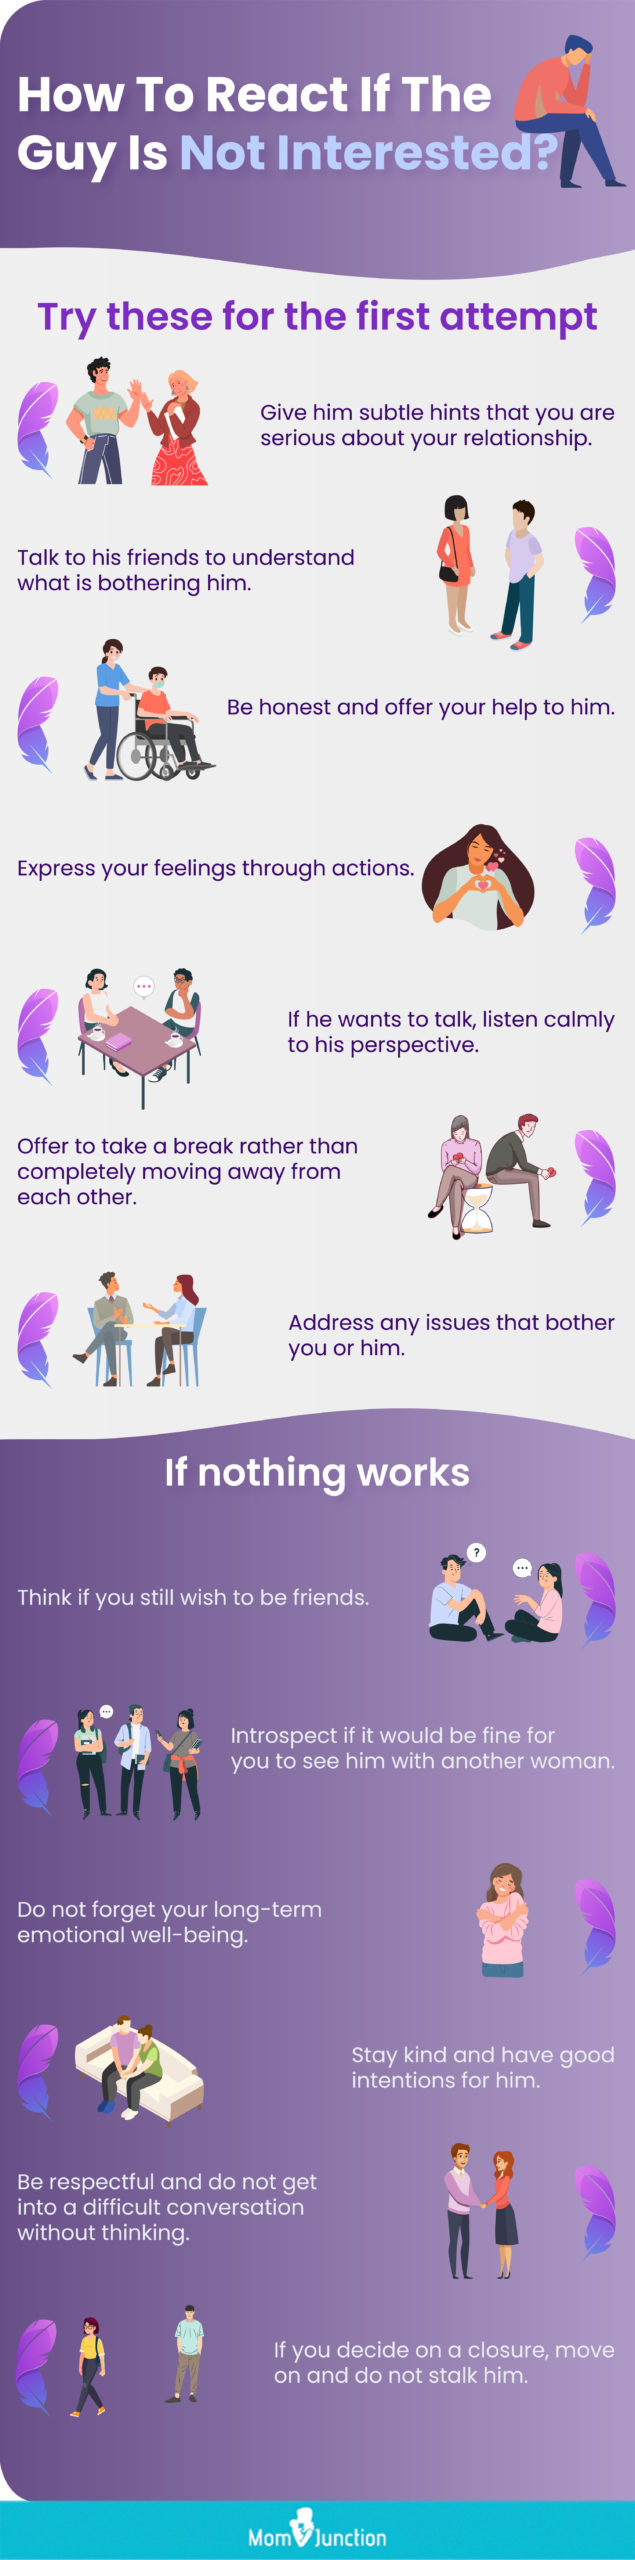 how to react if the guy is not interested [infographic]